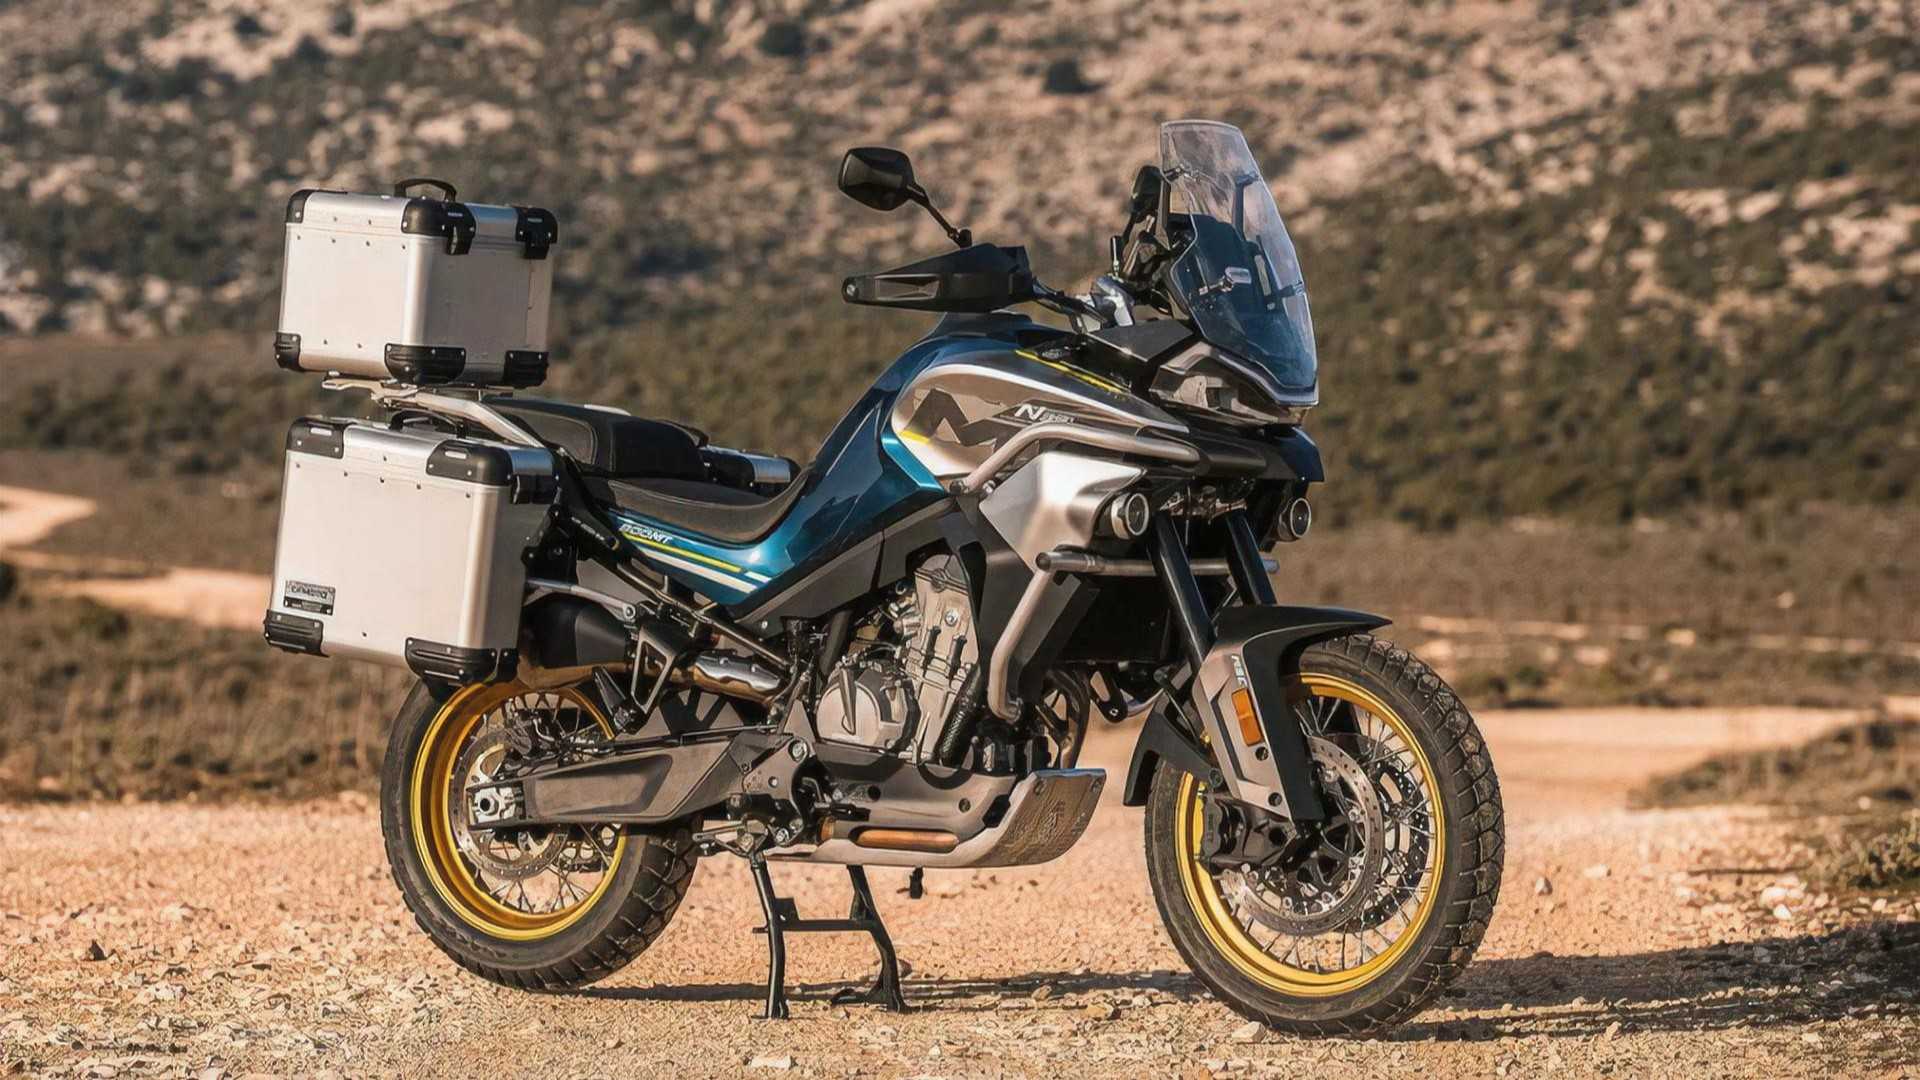 Here's Our First Official Look At The CFMoto MT800